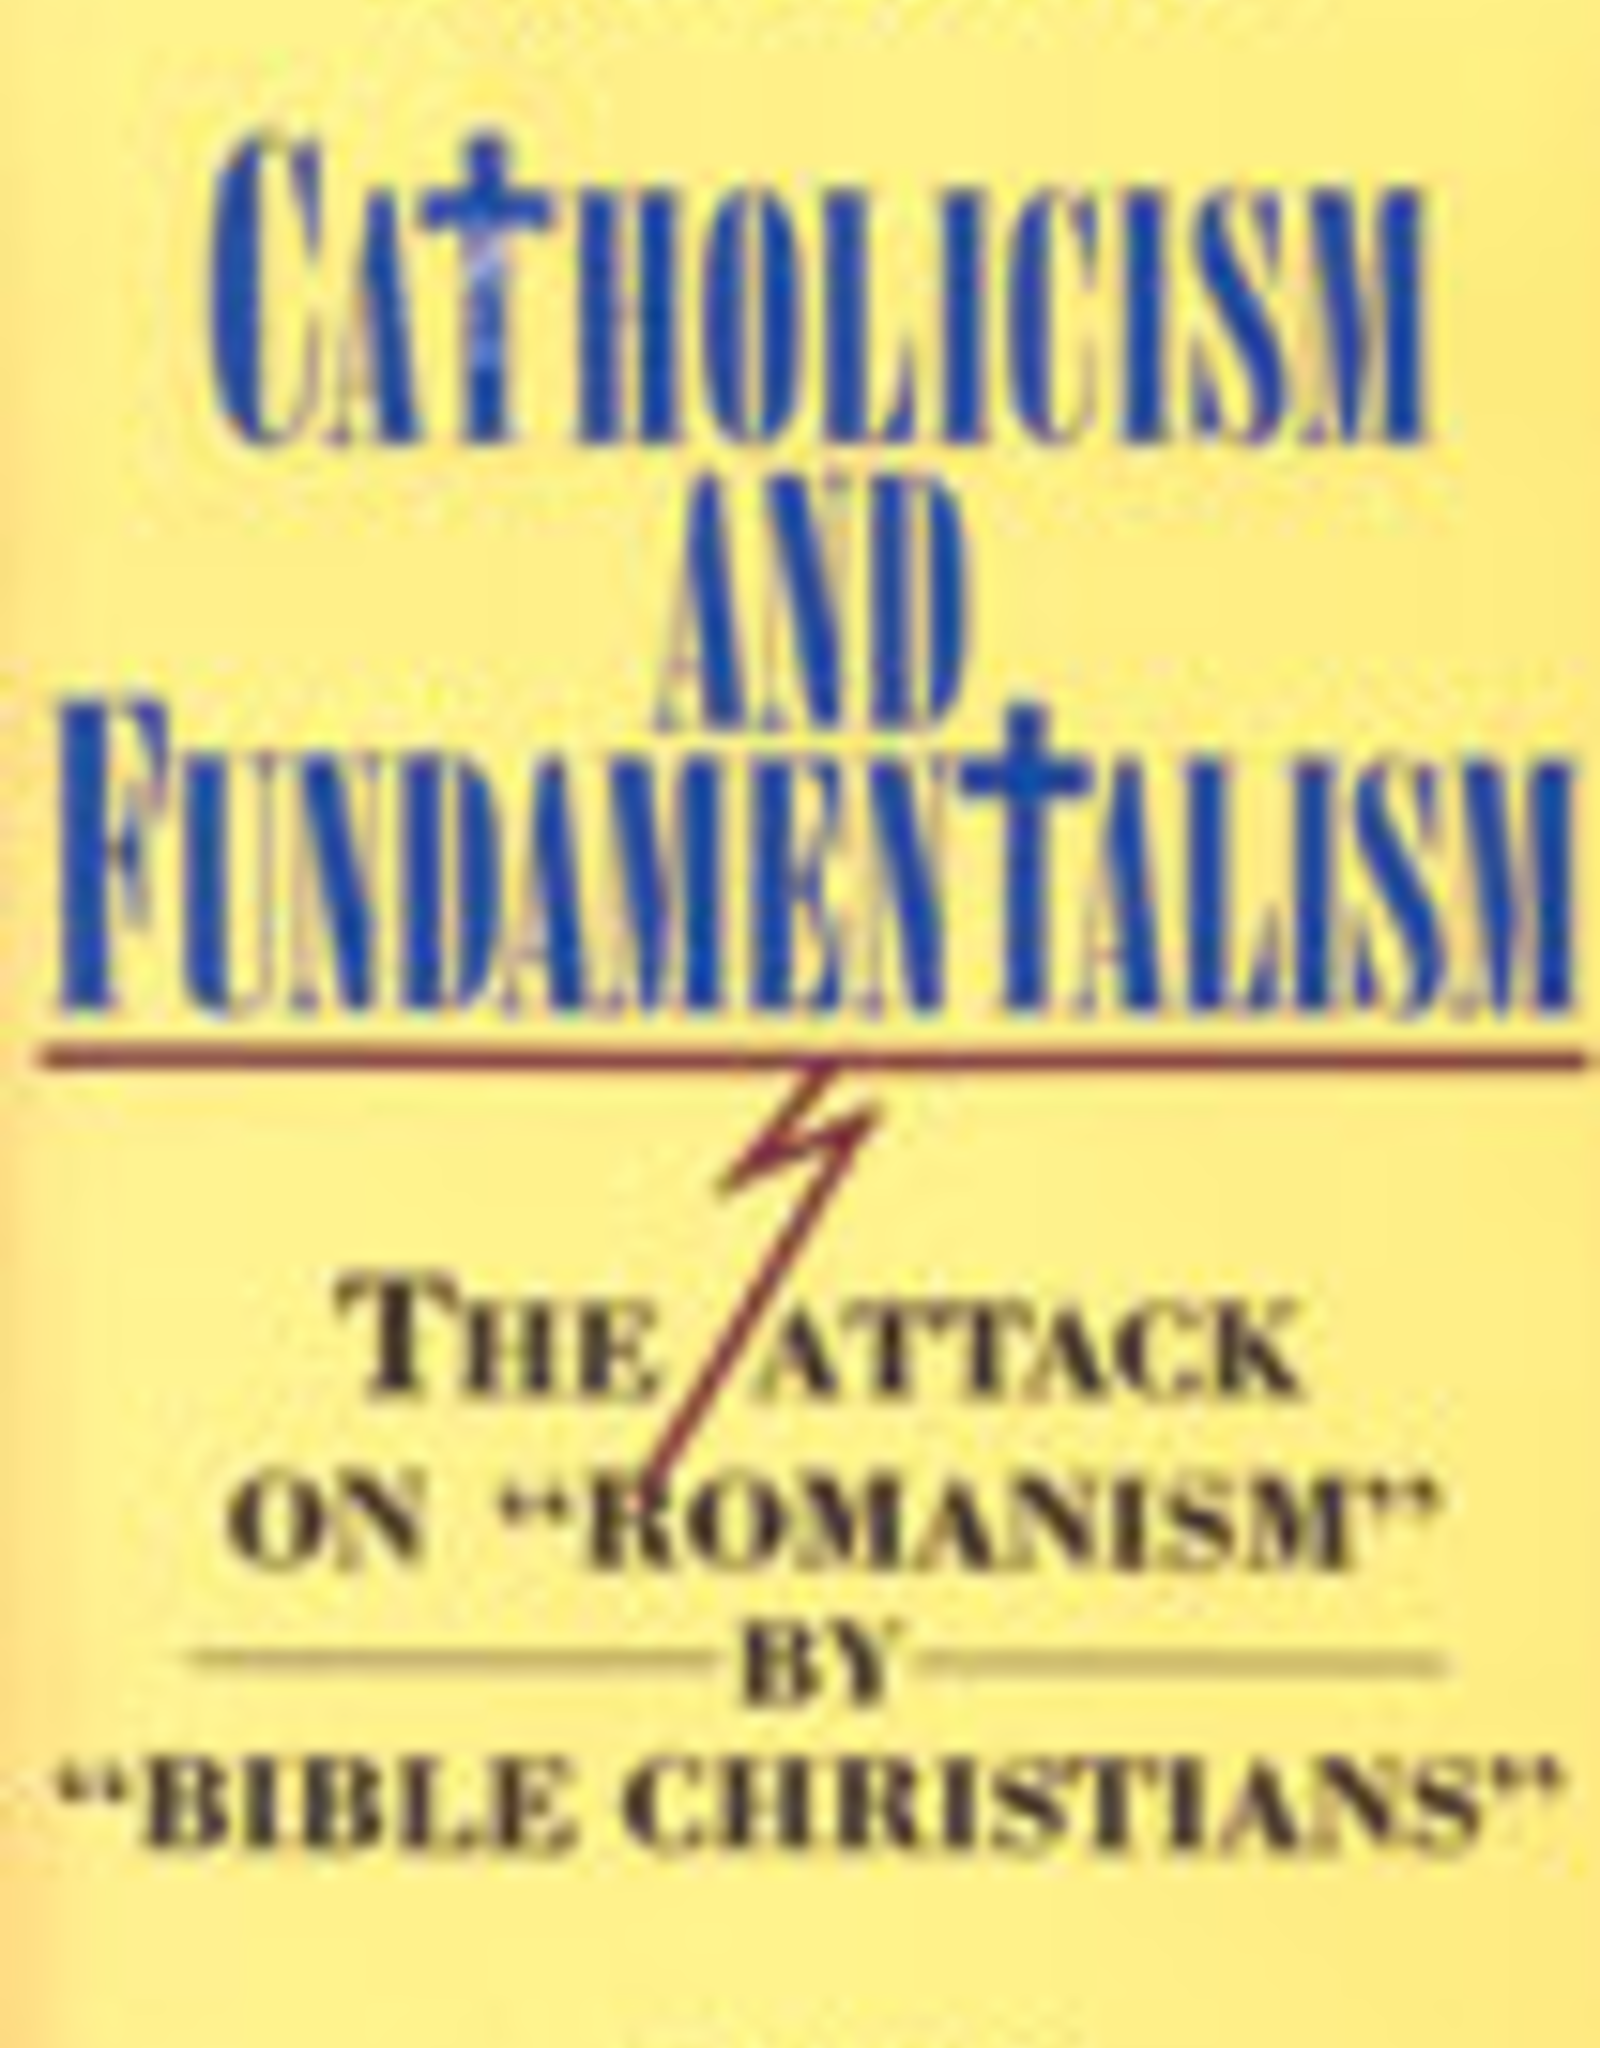 Ignatius Press Catholicism and Fundamentalism:  The Attack on "Romanism" by "Bible Christians,"  by Karl Keating